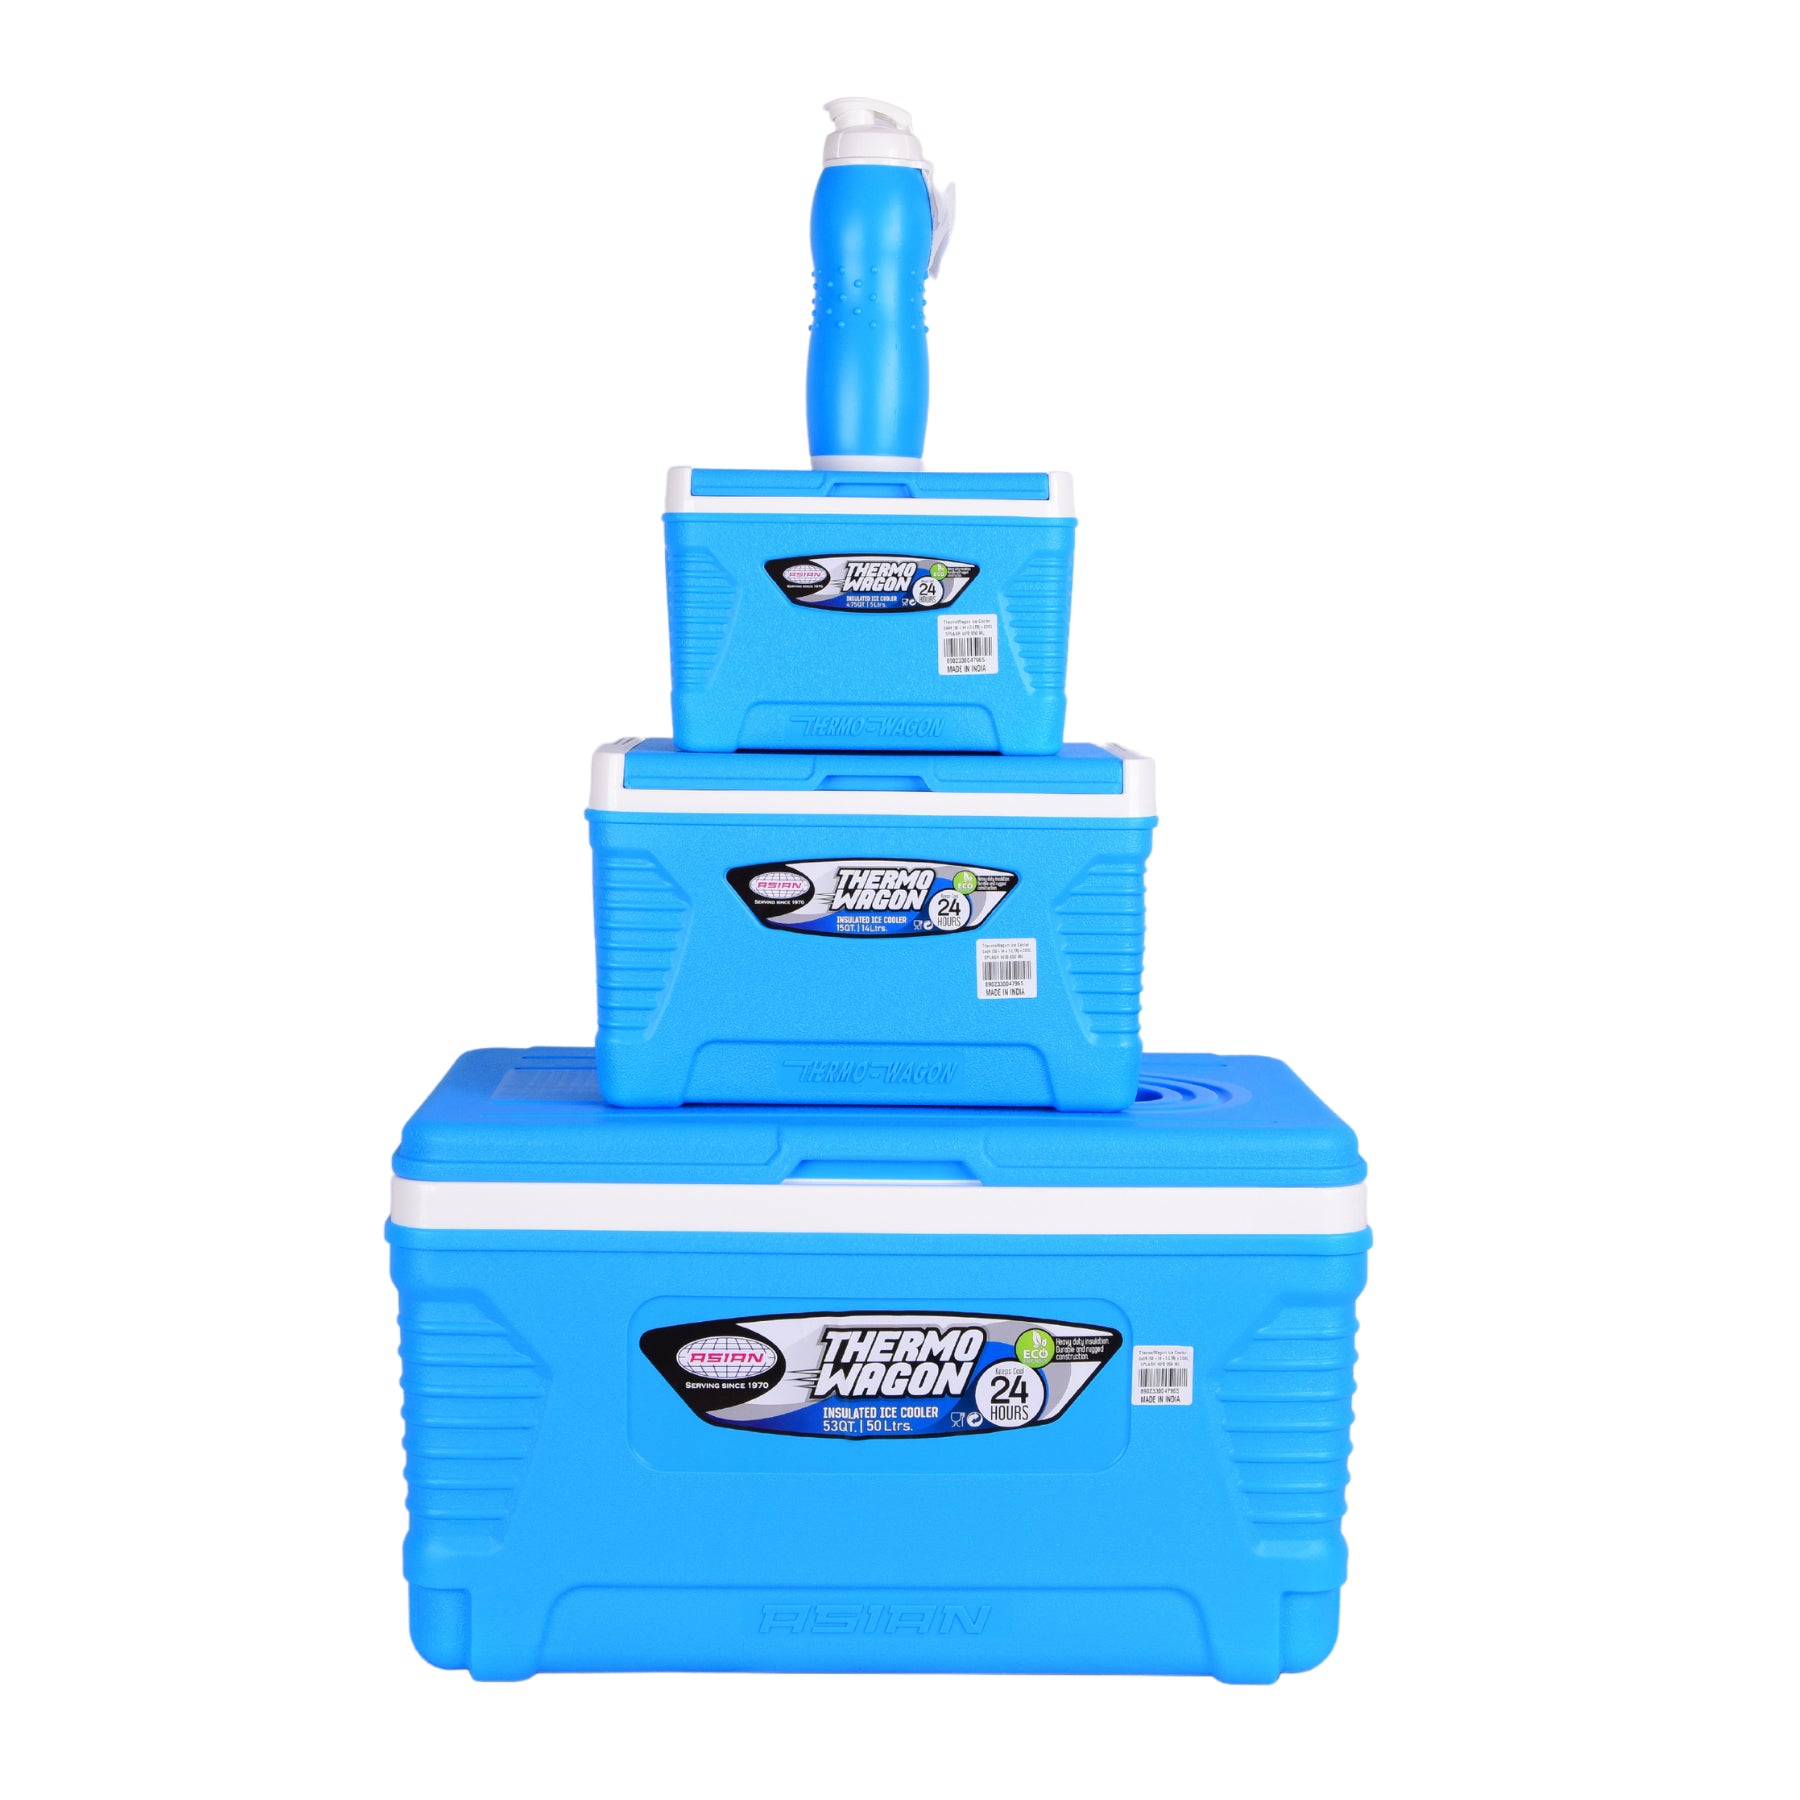 Thermo Wagon Insulated Ice cooler